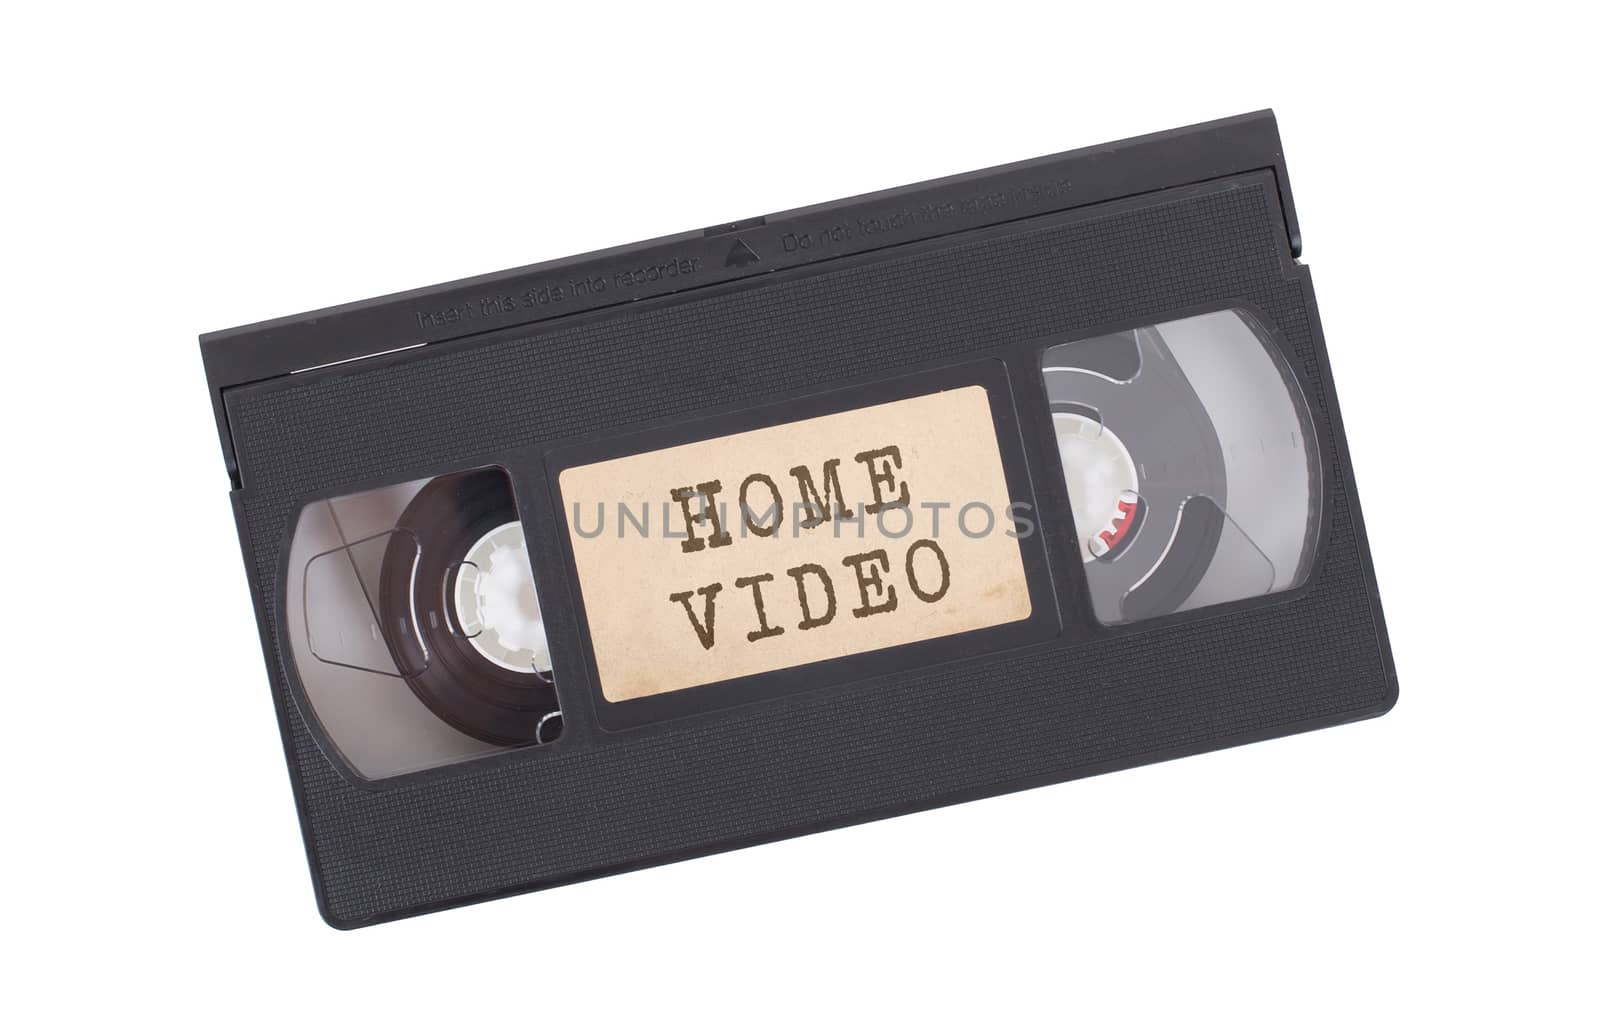 Retro videotape isolated on a white background - Home video